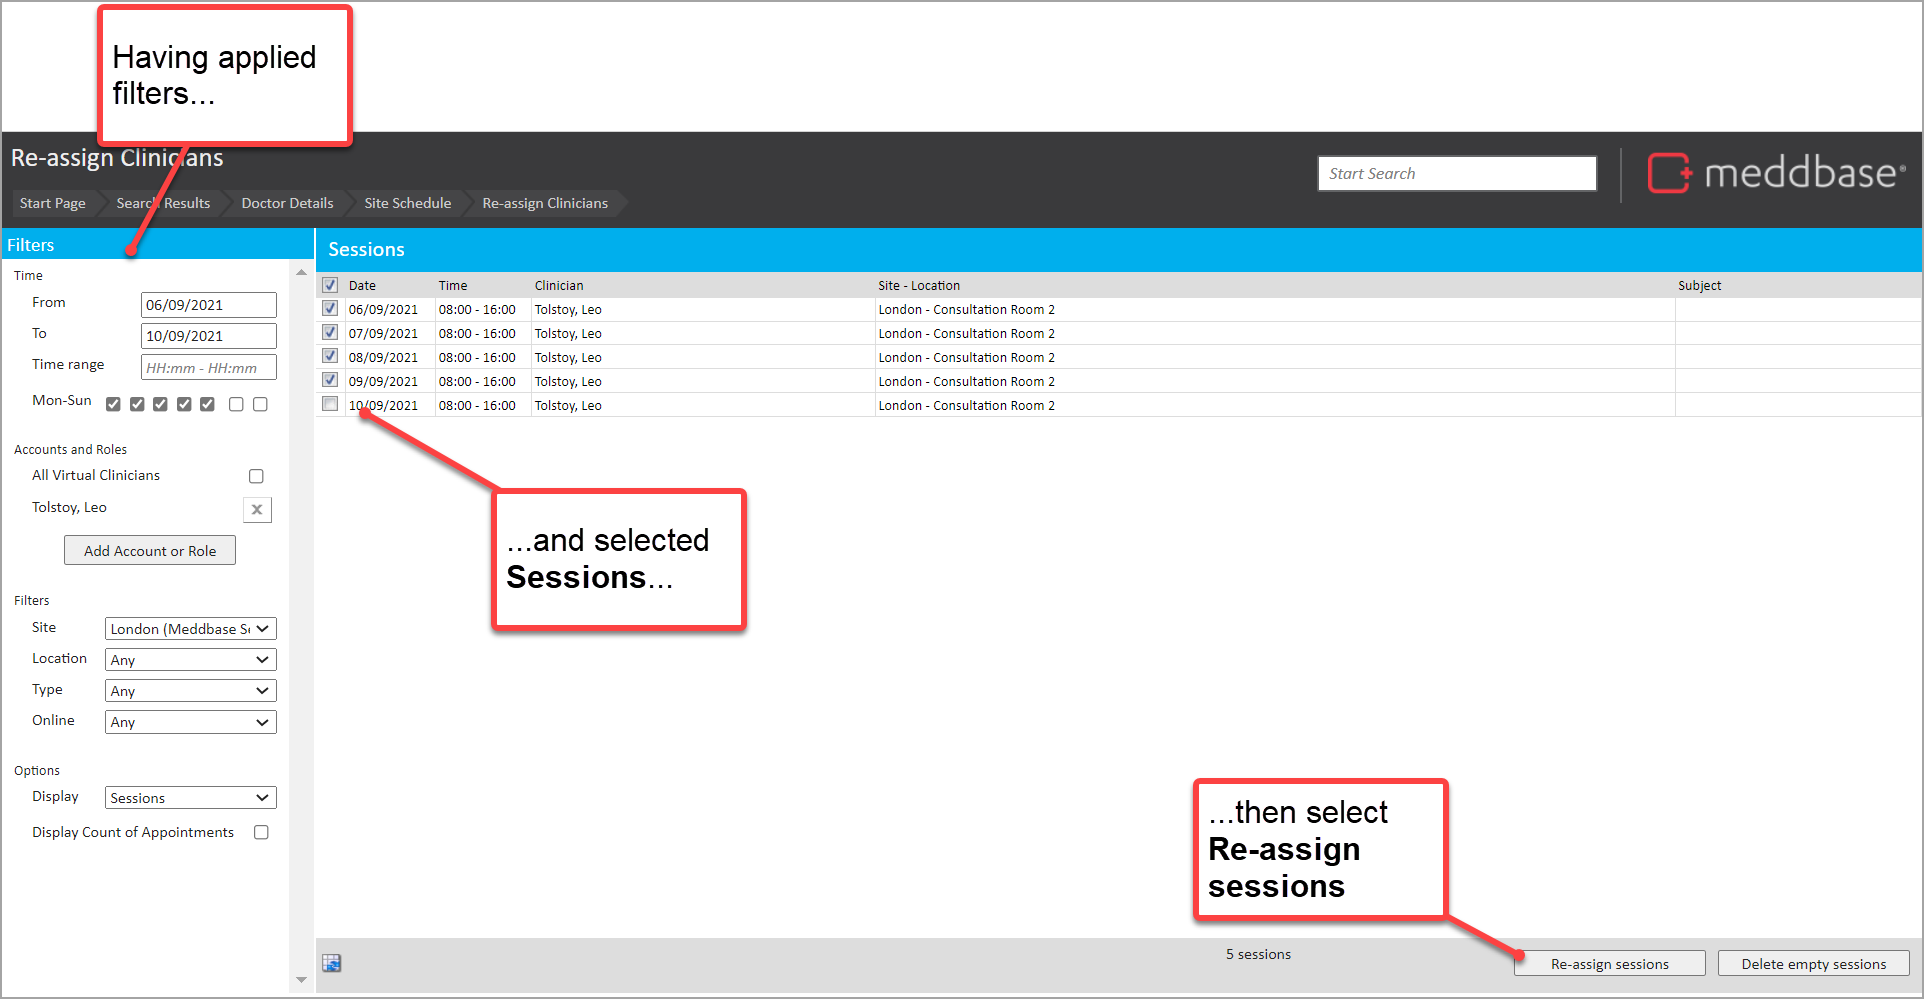 Re-assign clinician screen with annotations for filters - sessions and then select re-assign button